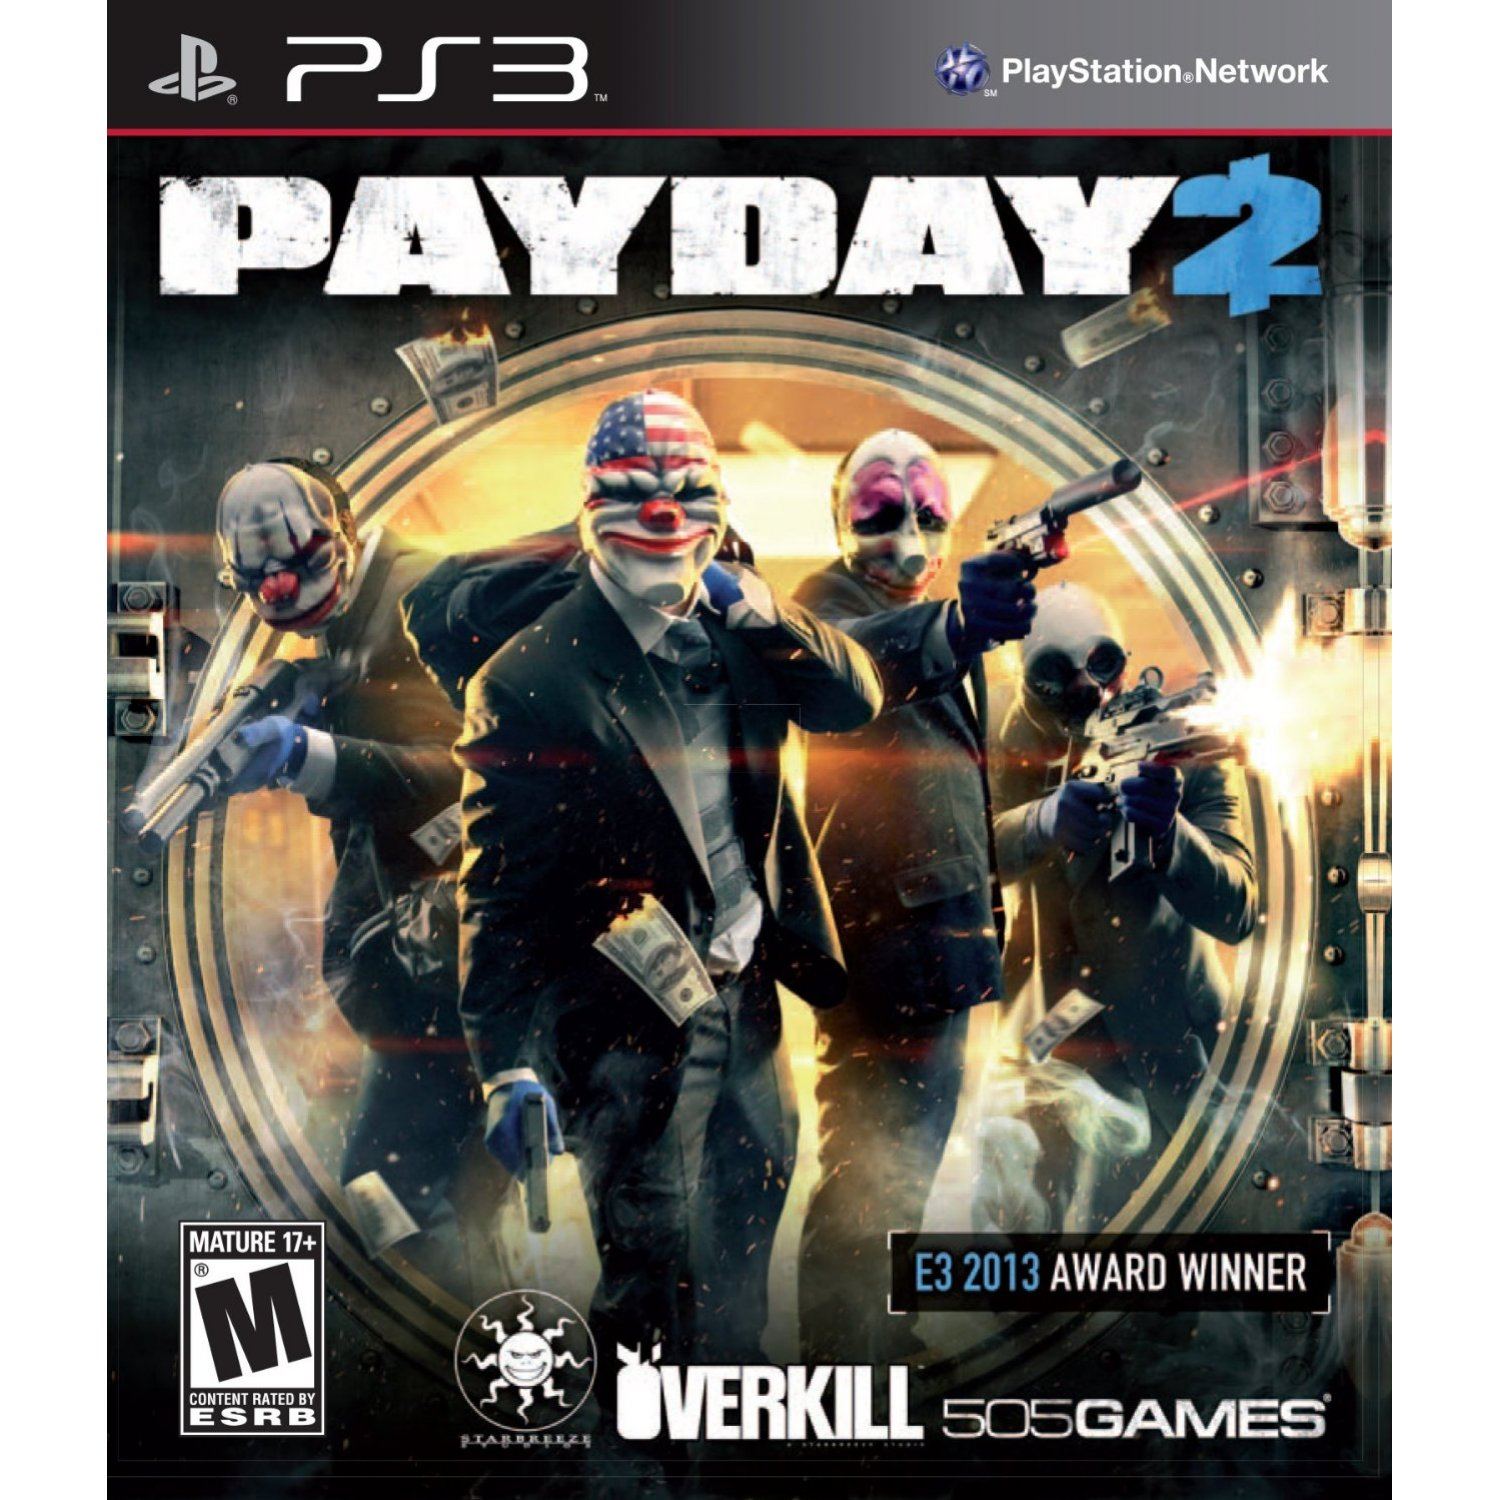 Payday 2 (Import)